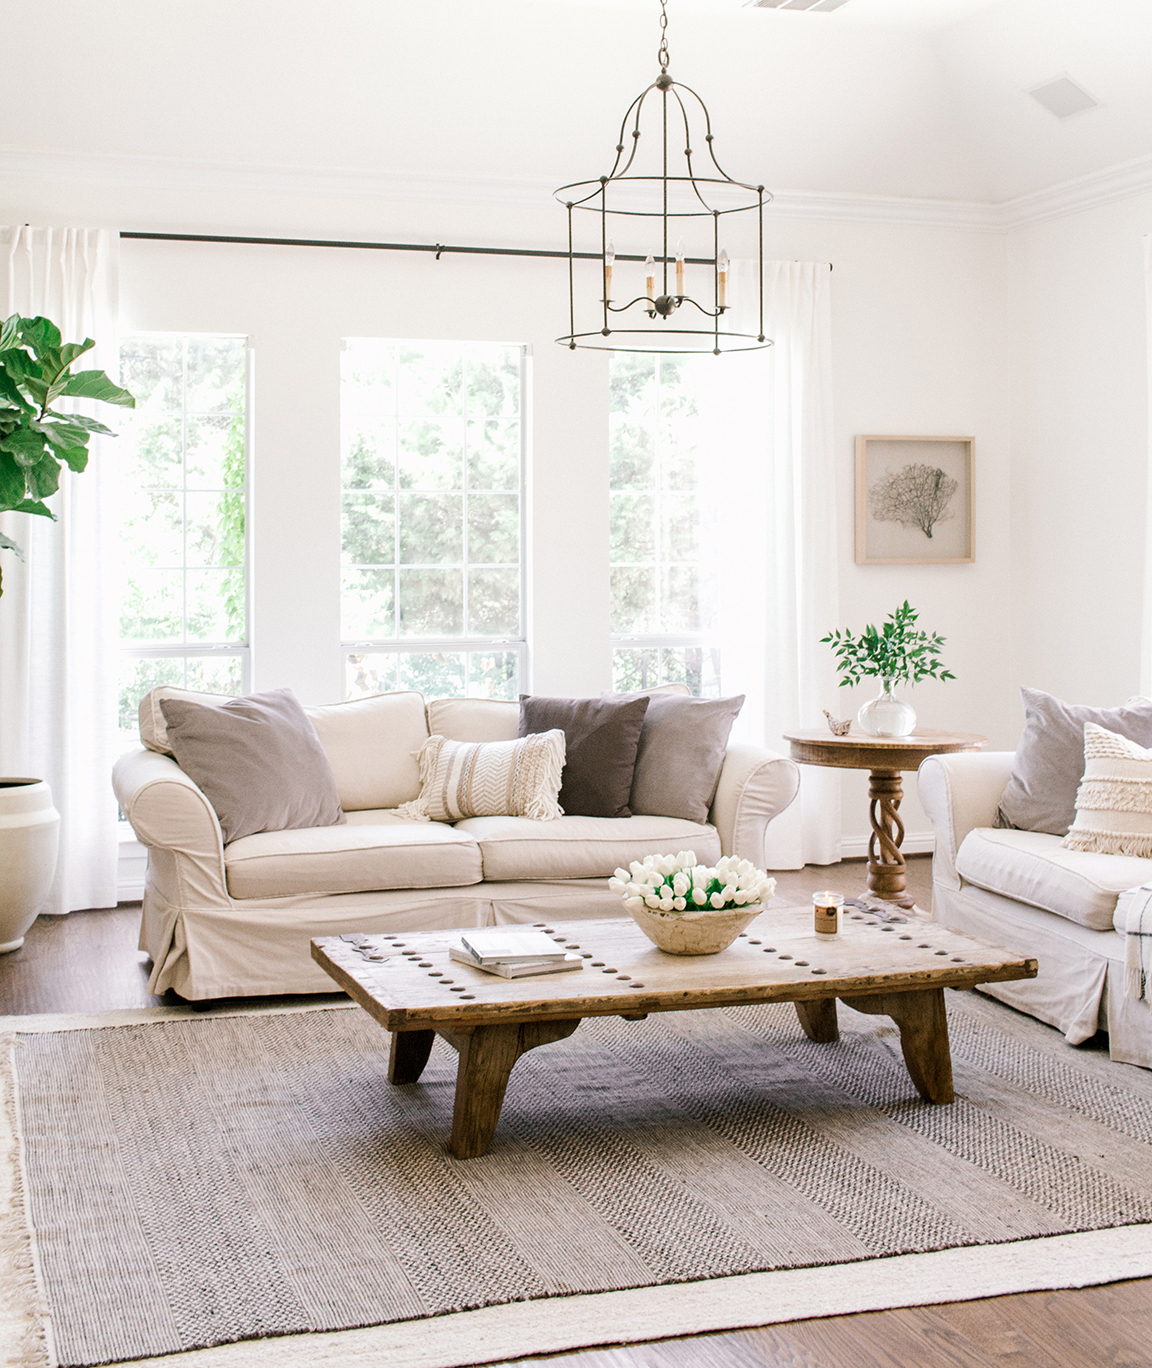 Living Room Update: Two New Rugs For a Cozy, Layered Look — The Property  Lovers